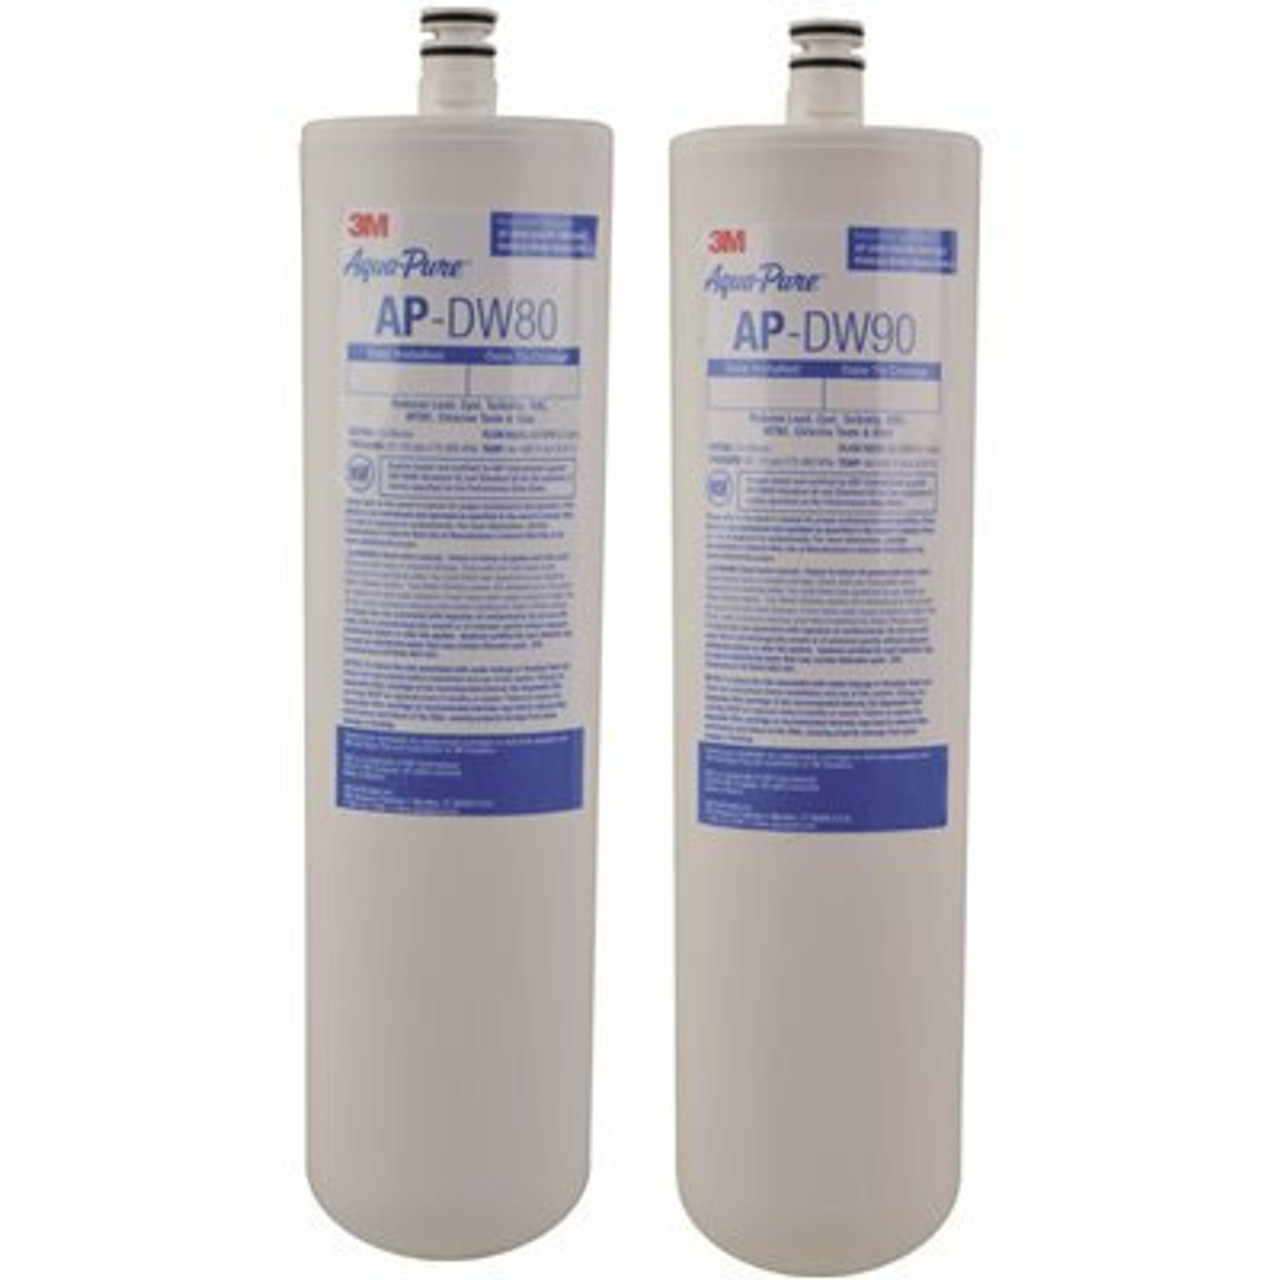 3M Aqua-Pure Under Sink Replacement Water Filter Ap-Dw80/90 2 Filter Replacement Cartridge For Aqua-Pure Ap-Dws1000 System